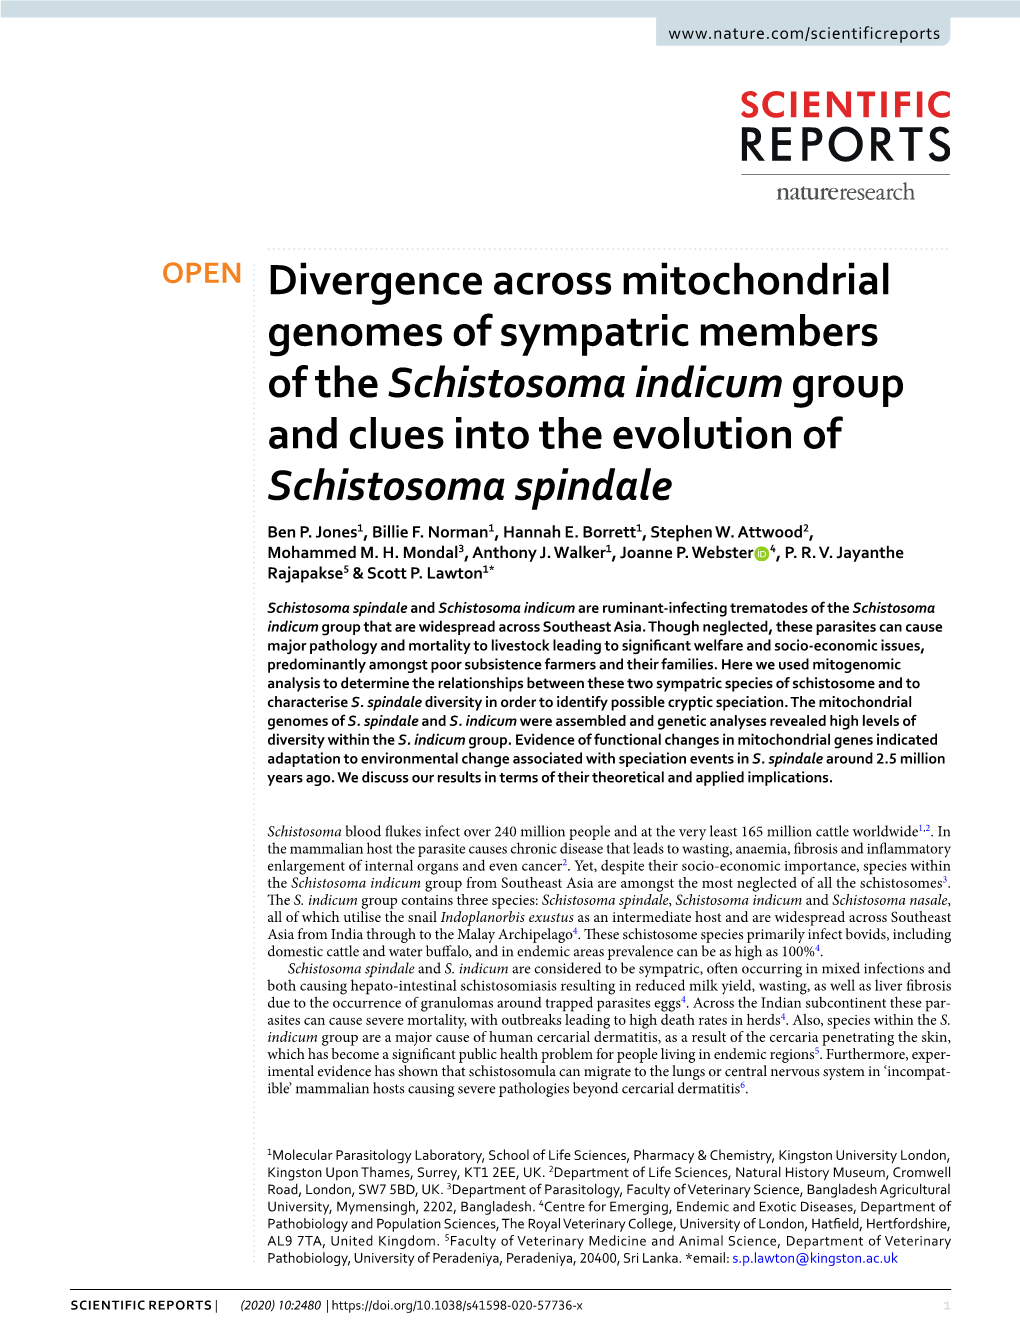 Divergence Across Mitochondrial Genomes of Sympatric Members of the Schistosoma Indicum Group and Clues Into the Evolution of Schistosoma Spindale Ben P